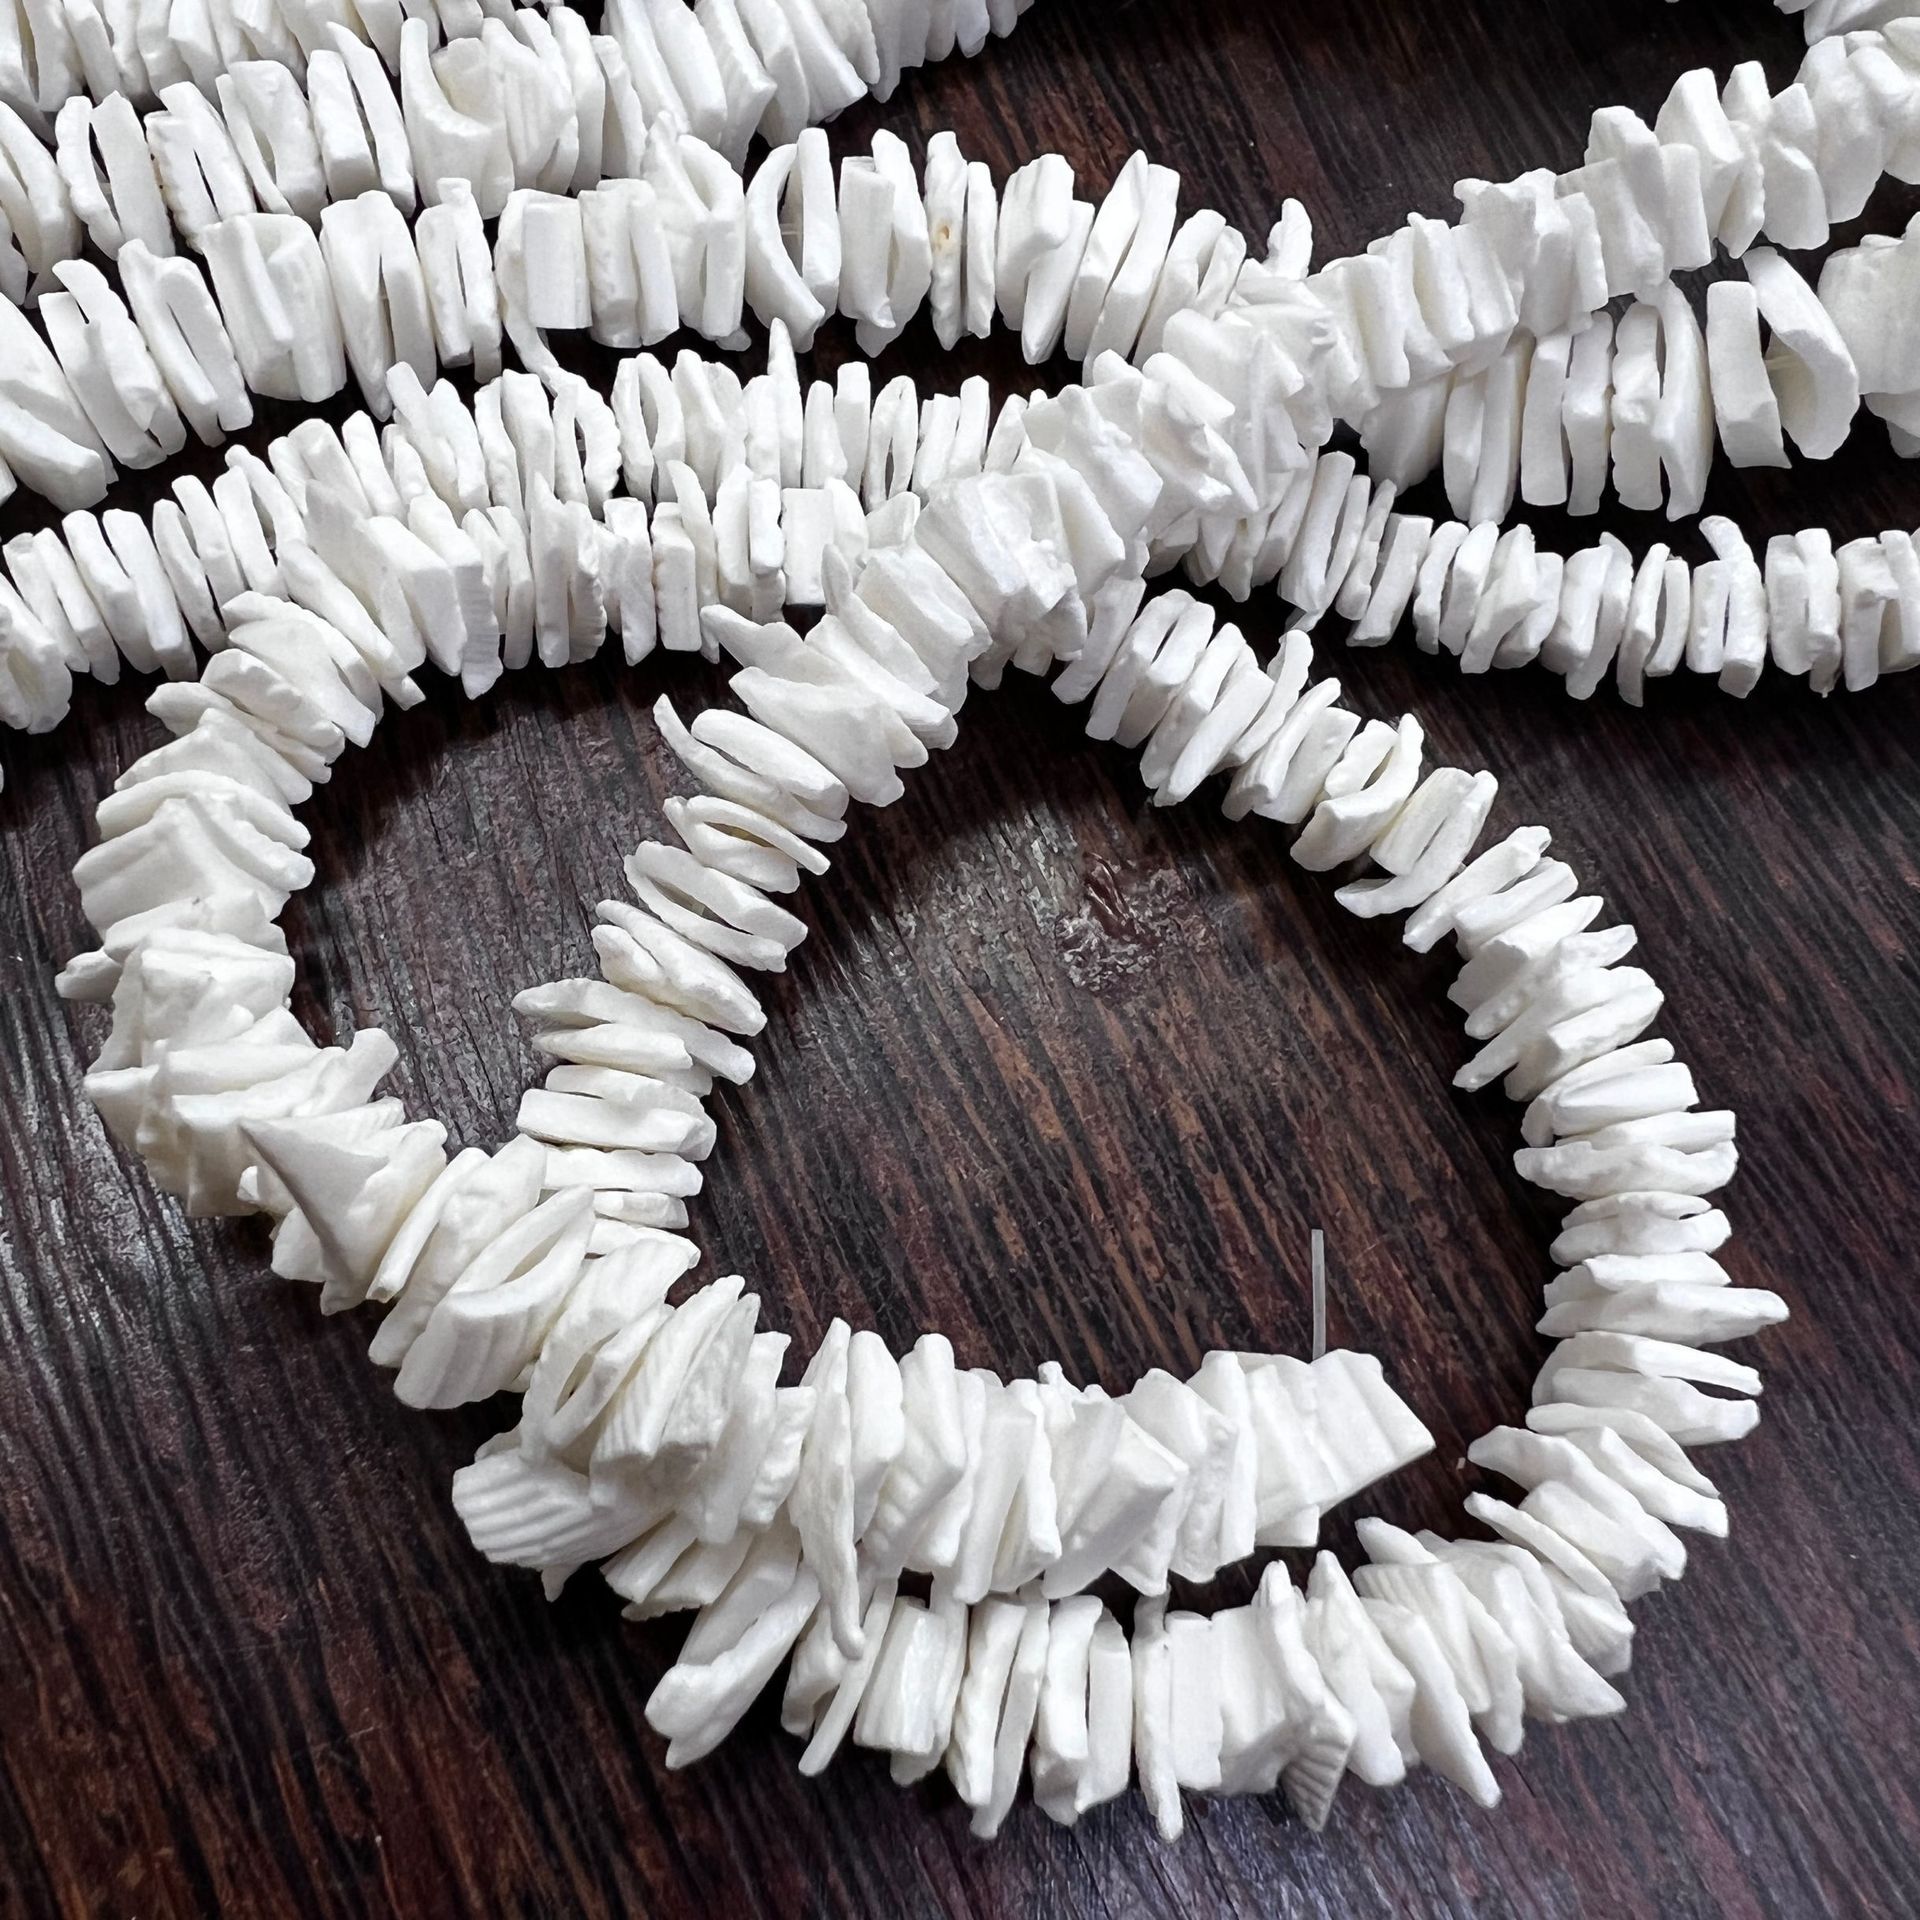 Philippines Square Piece 8-12mm Sea Shell Bead String Jewelry Accessories Bracelet Semi-Finished Accessories Amazon Hot Selling Product